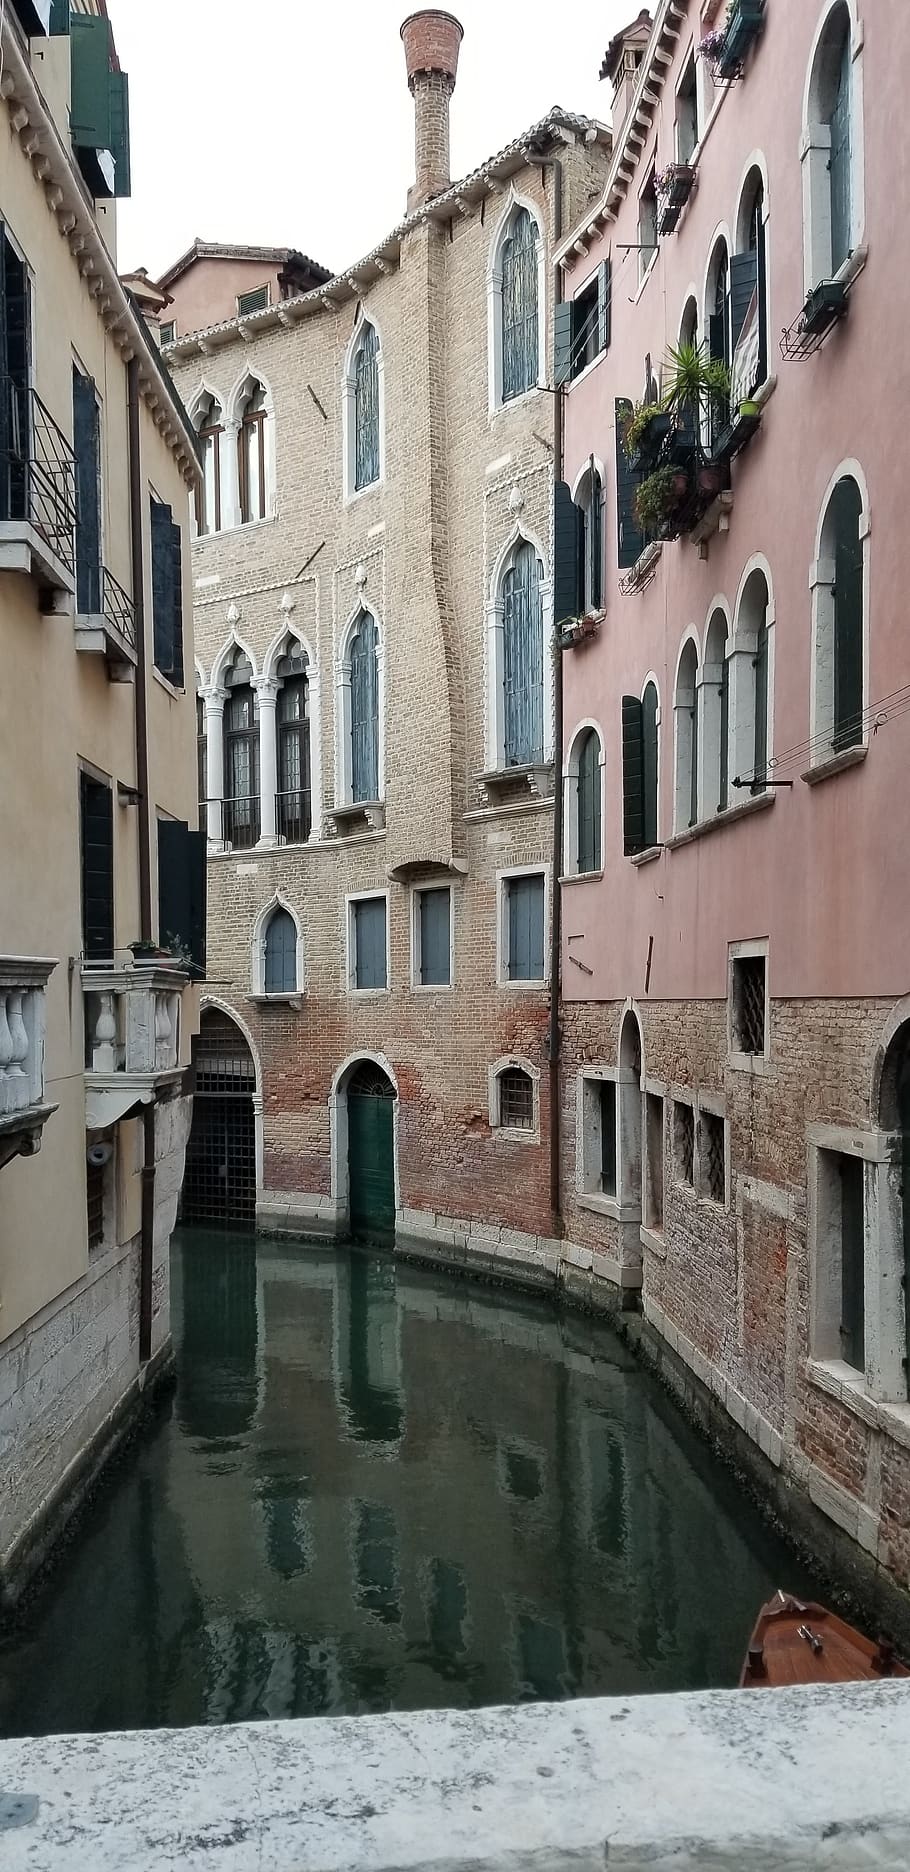 venice, canal, italy, architecture, water, city, romantic, travel, tourism, buildings